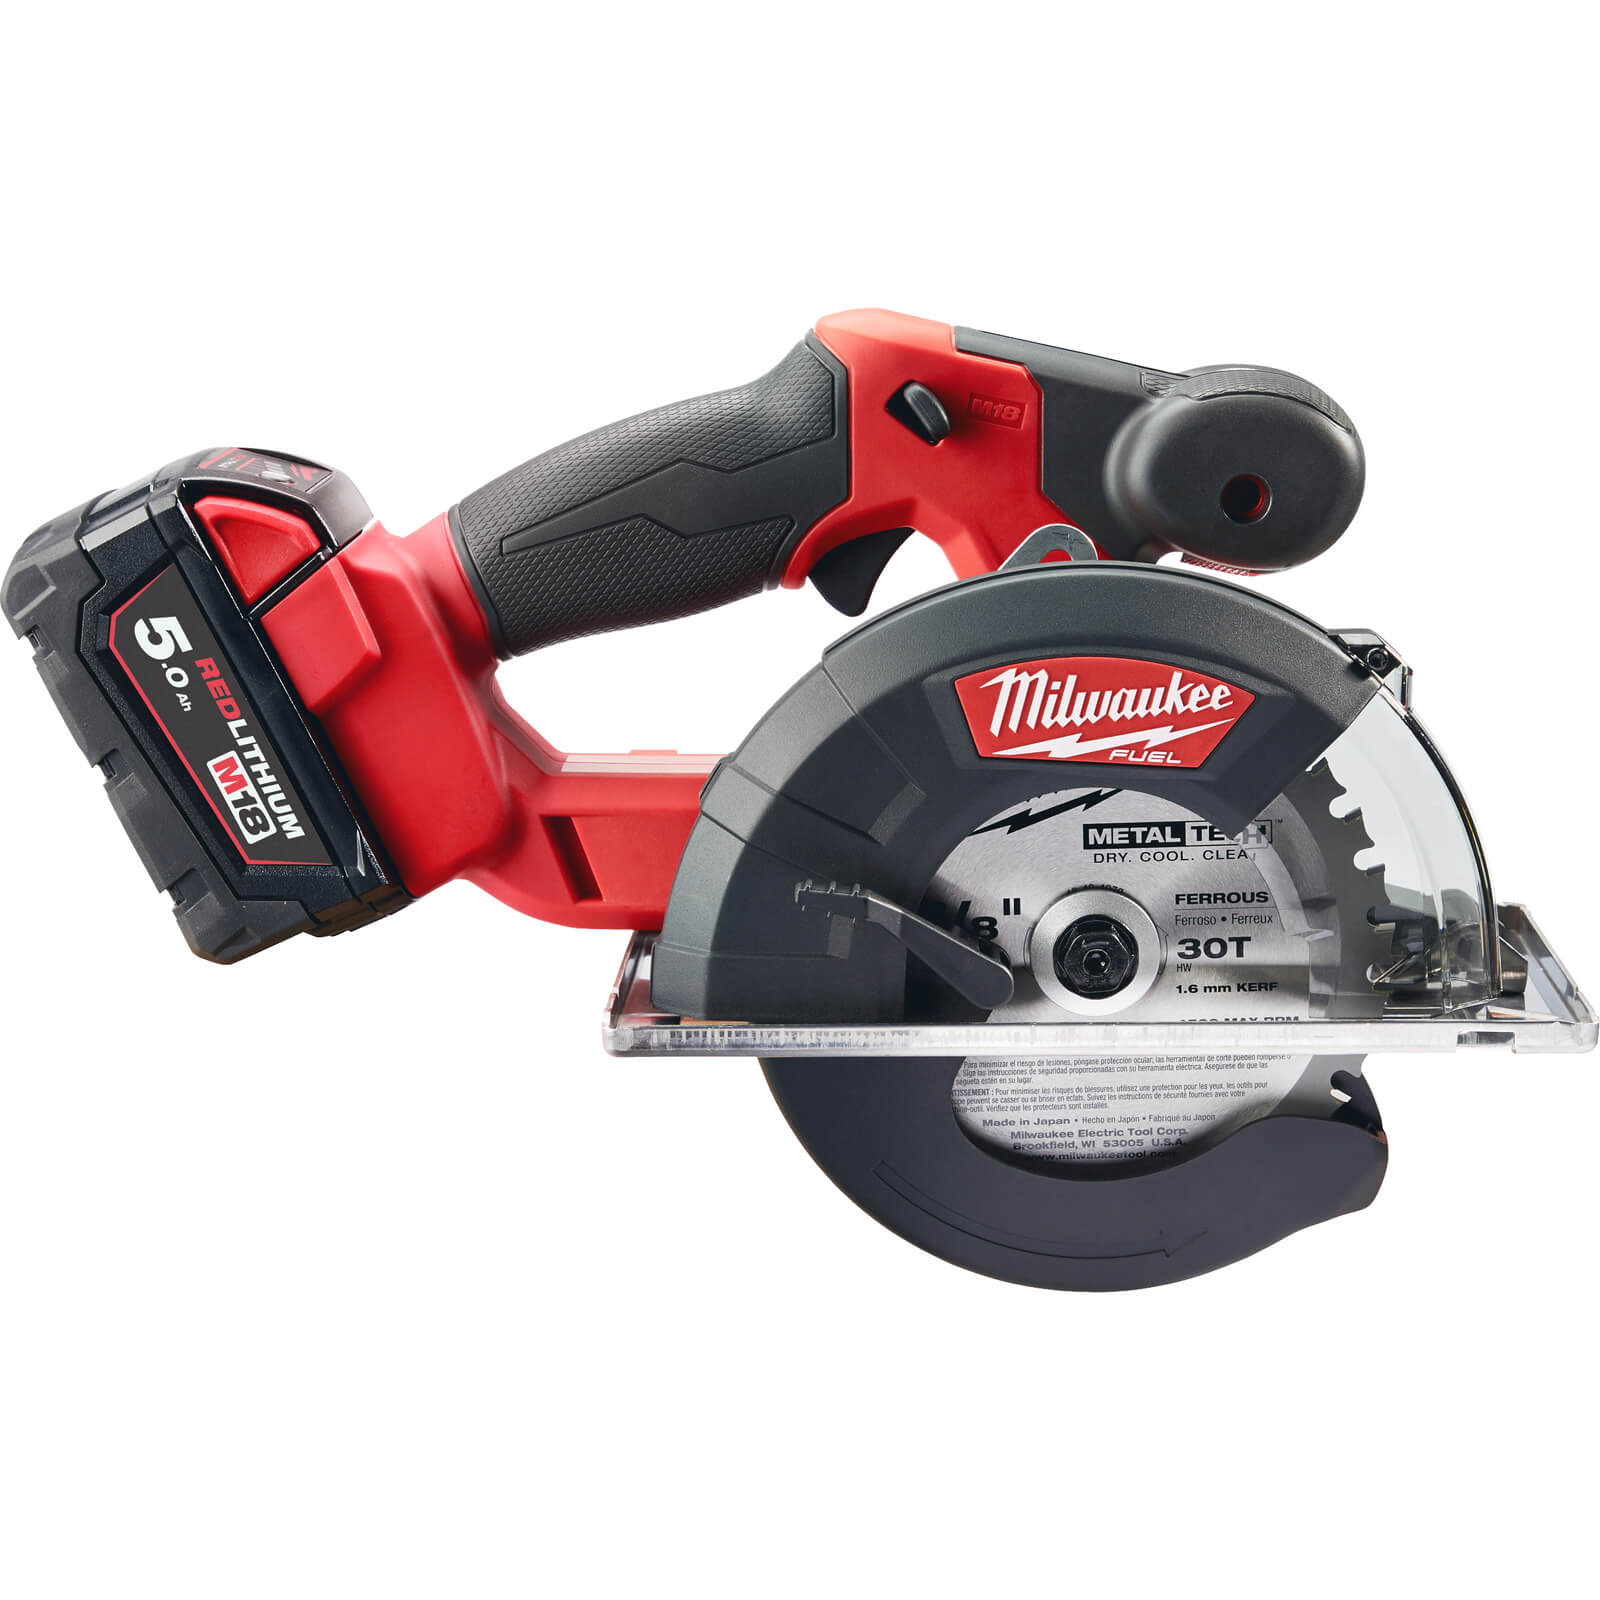 Image of Milwaukee M18 FMCS Fuel 18v Cordless Brushless Metal Cutting Circular Saw 150mm 2 x 5ah Li-ion Charger Case